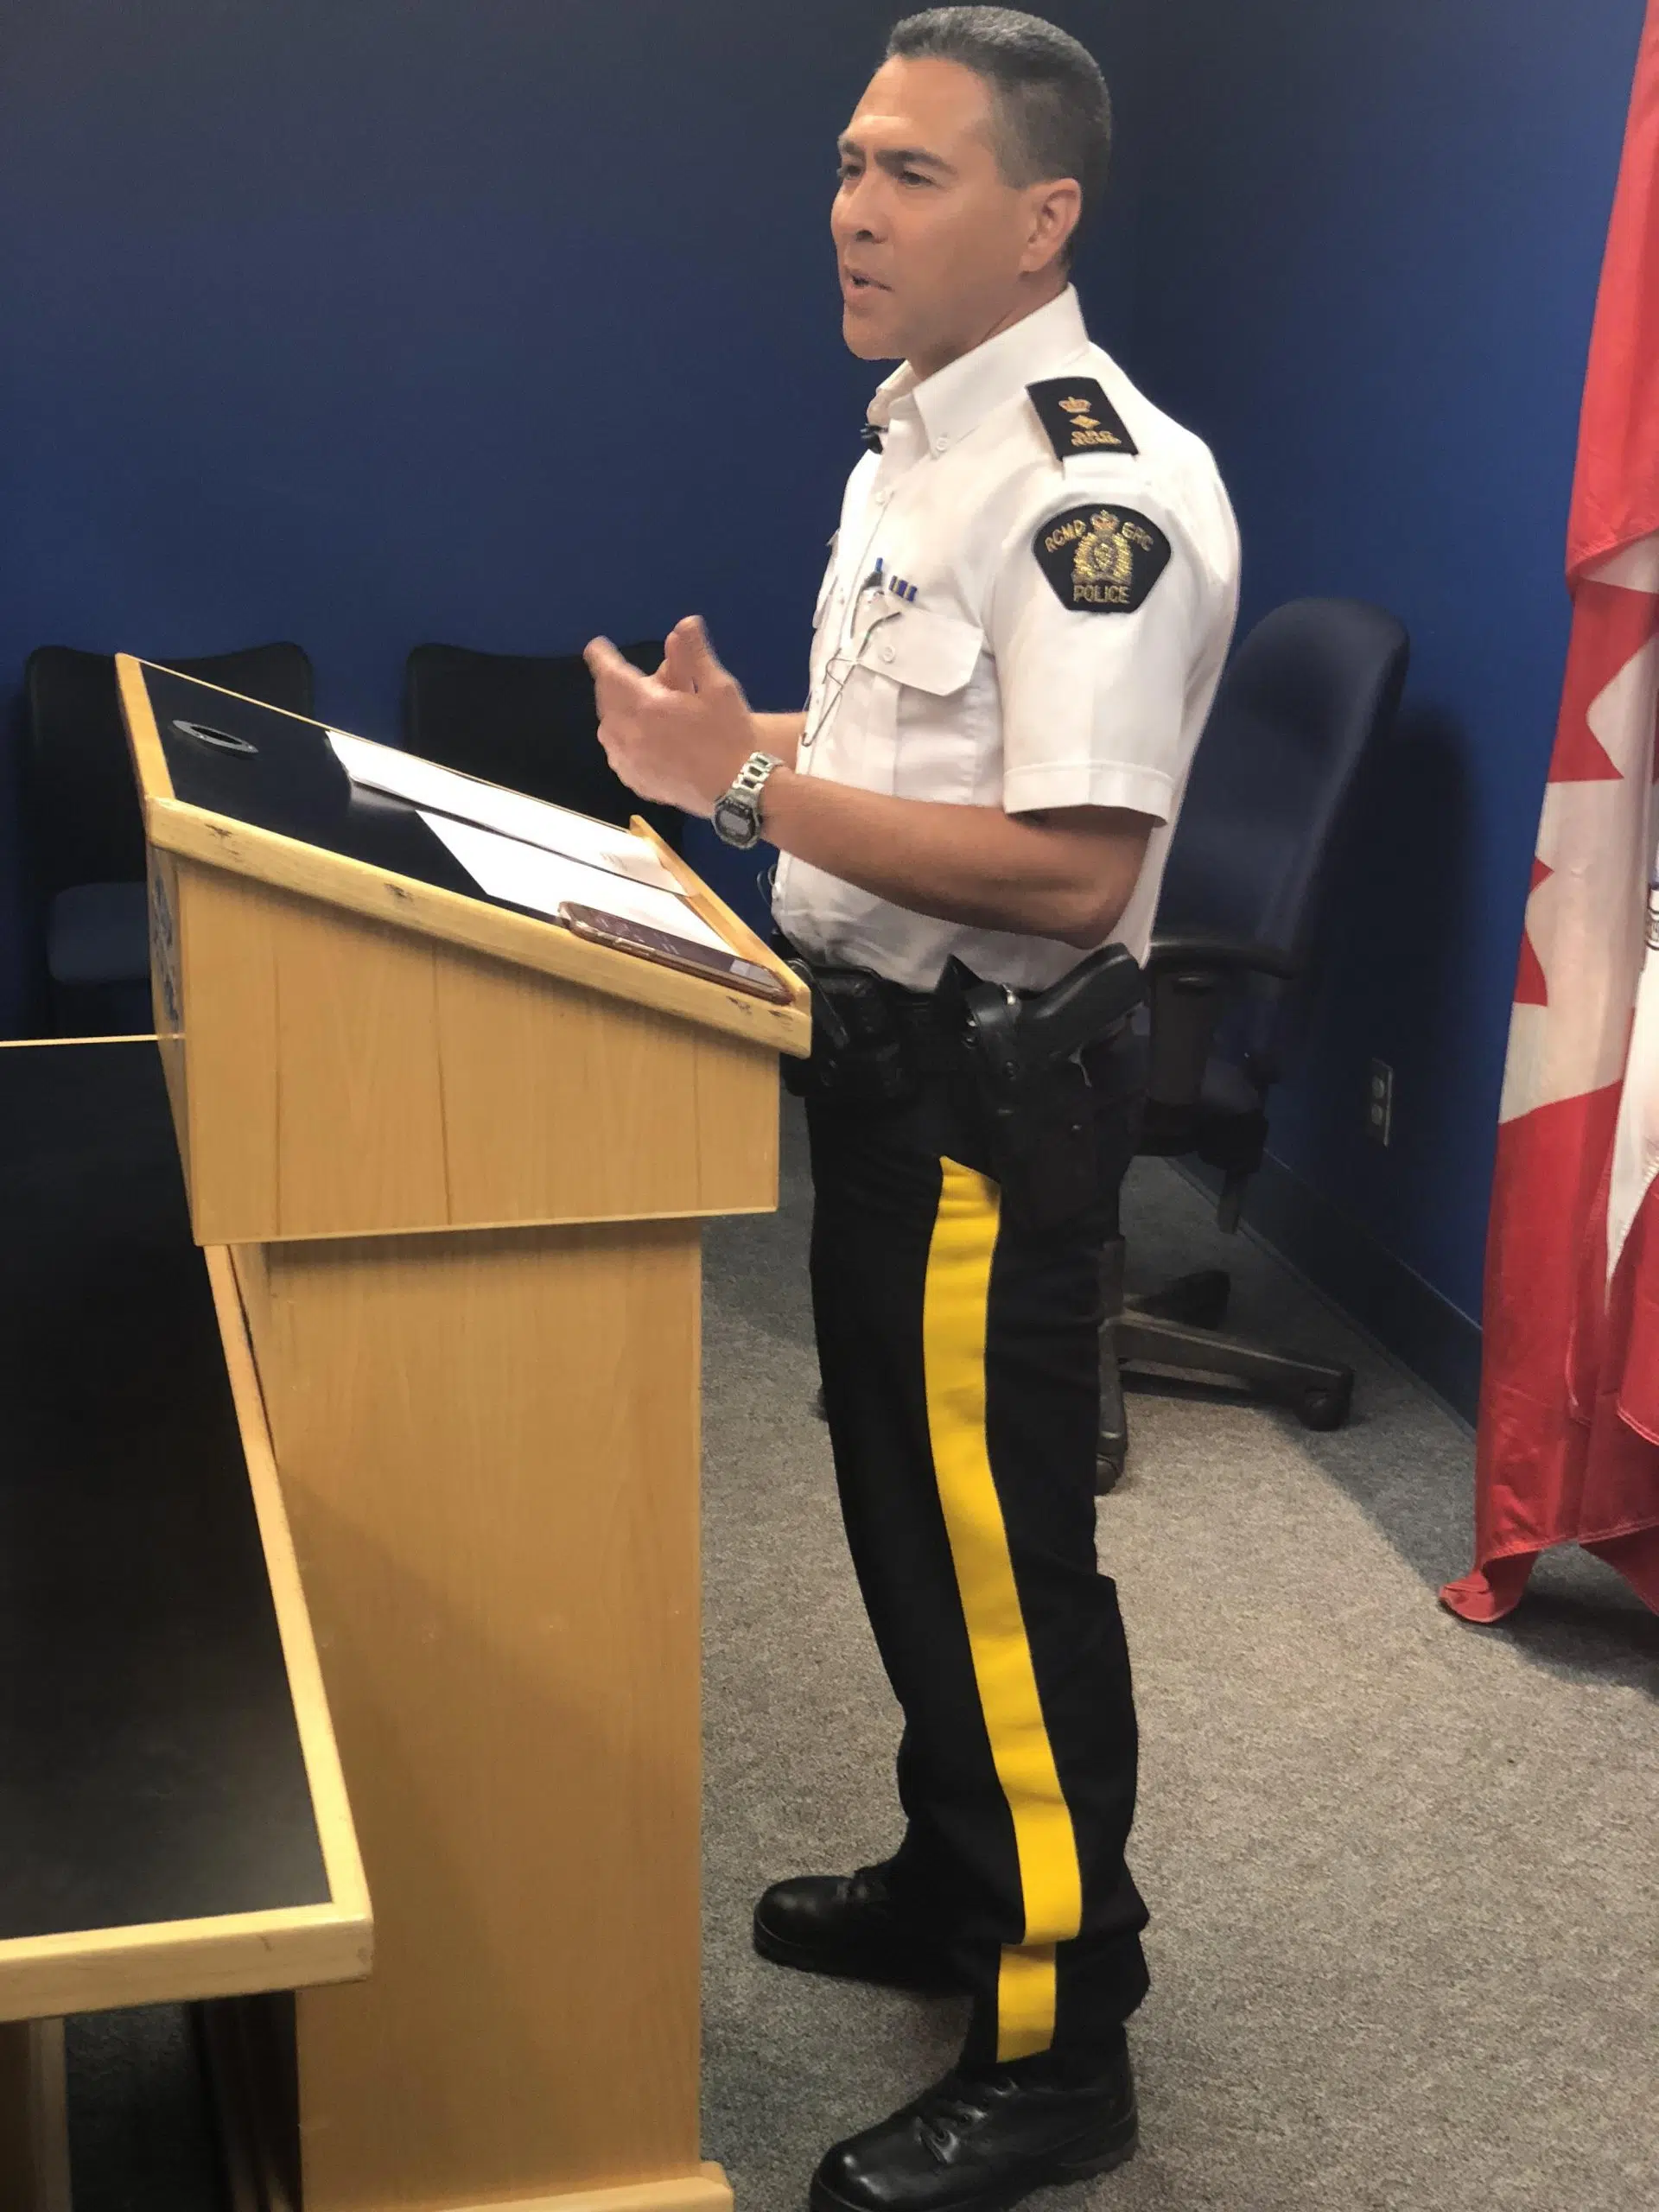 Kamloops RCMP Superintendent waiting for direction from Ottawa on legal pot laws